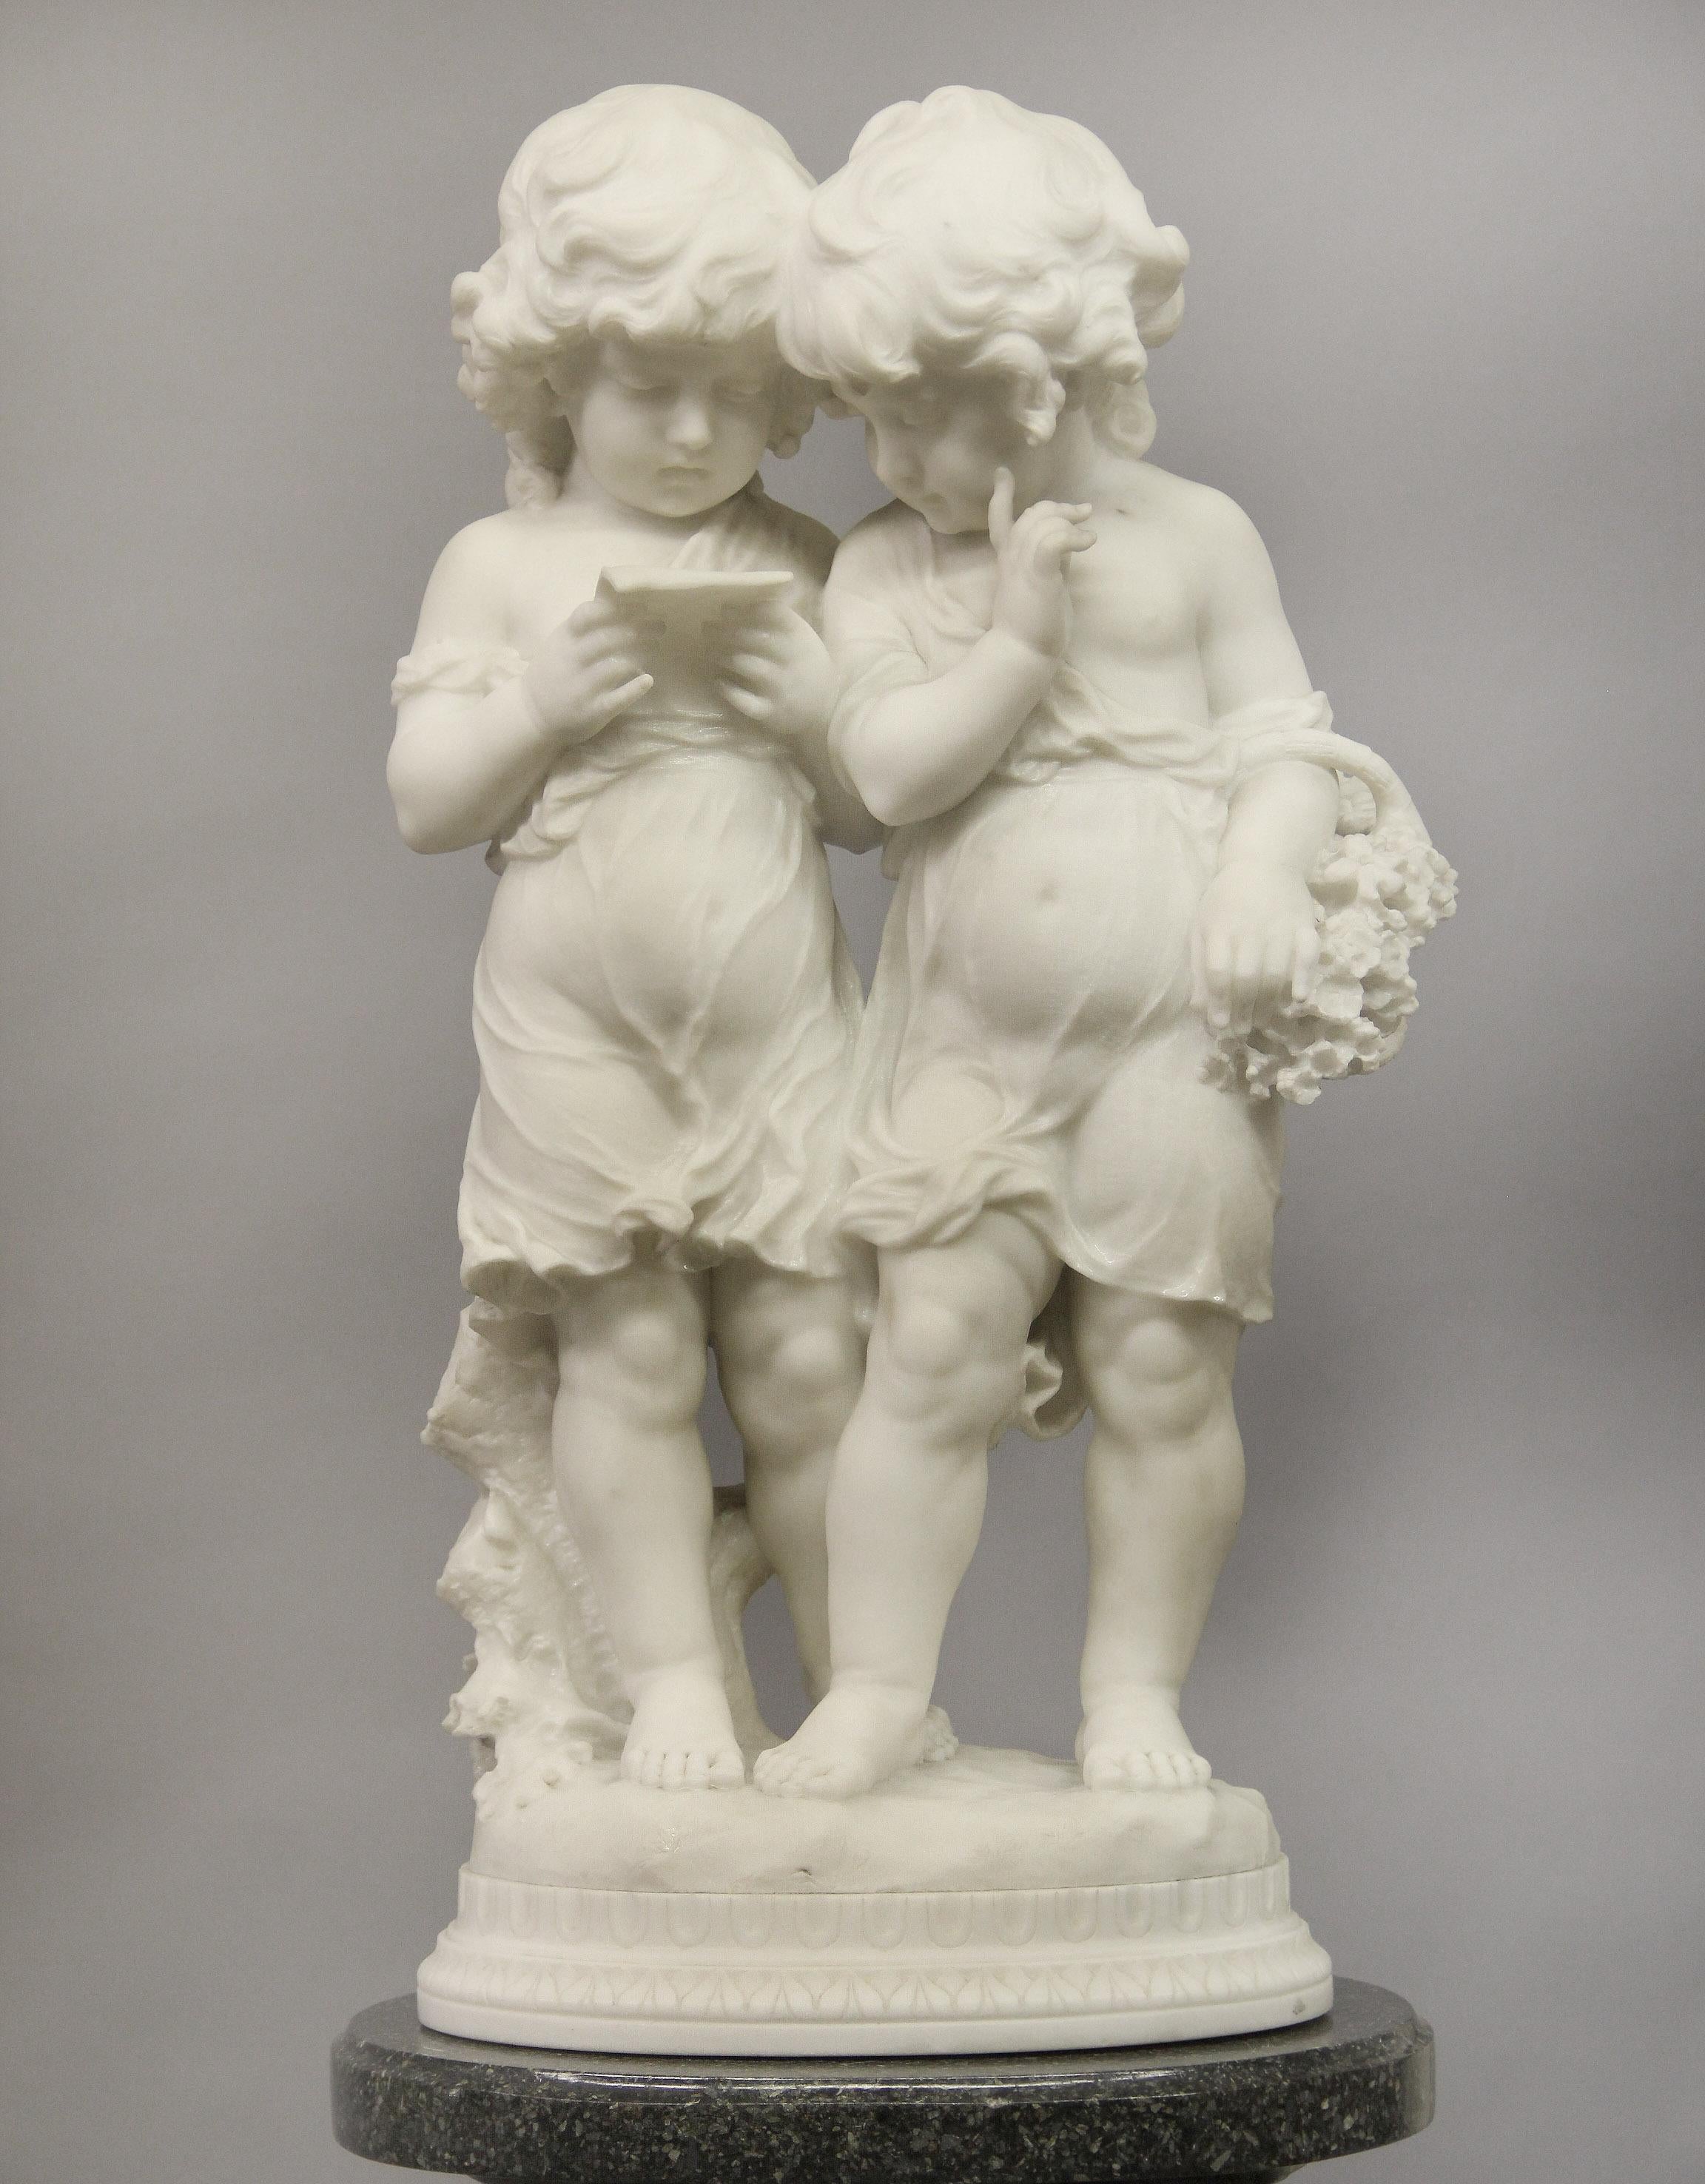 A lovely early 20th century Italian Carrara marble sculpture of two sisters by Affortunato Gory

Depicting two little girls reading, one with a basket of flowers, standing on a oval carved base

Inscribed A. Gory

Affortunato Gory 1895-1925